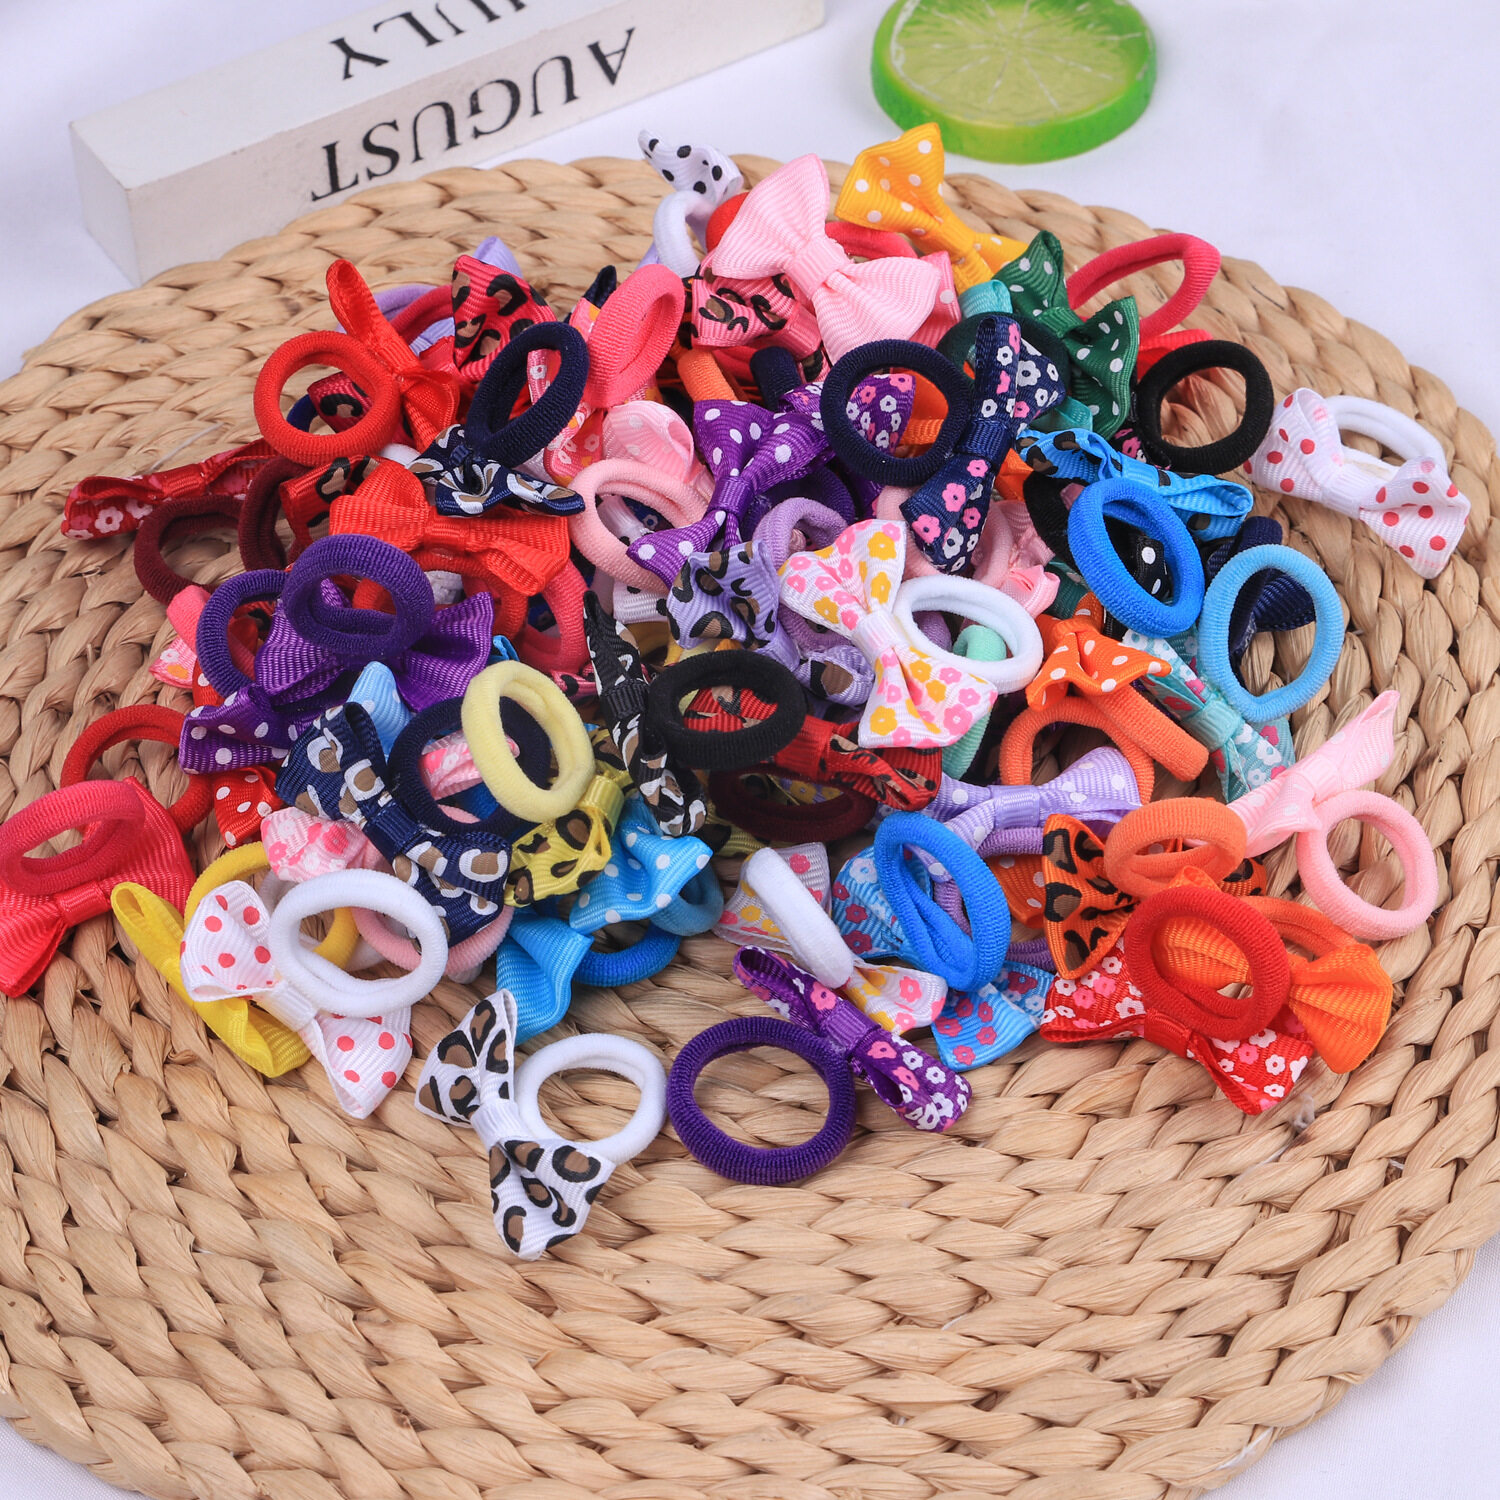 Peaoy 20PCS Baby Hair Ties with Bows for Infants Toddler Girls Grosgrain Ribbon Rubber Bands Elastic Ponytail Holders - image 2 of 5